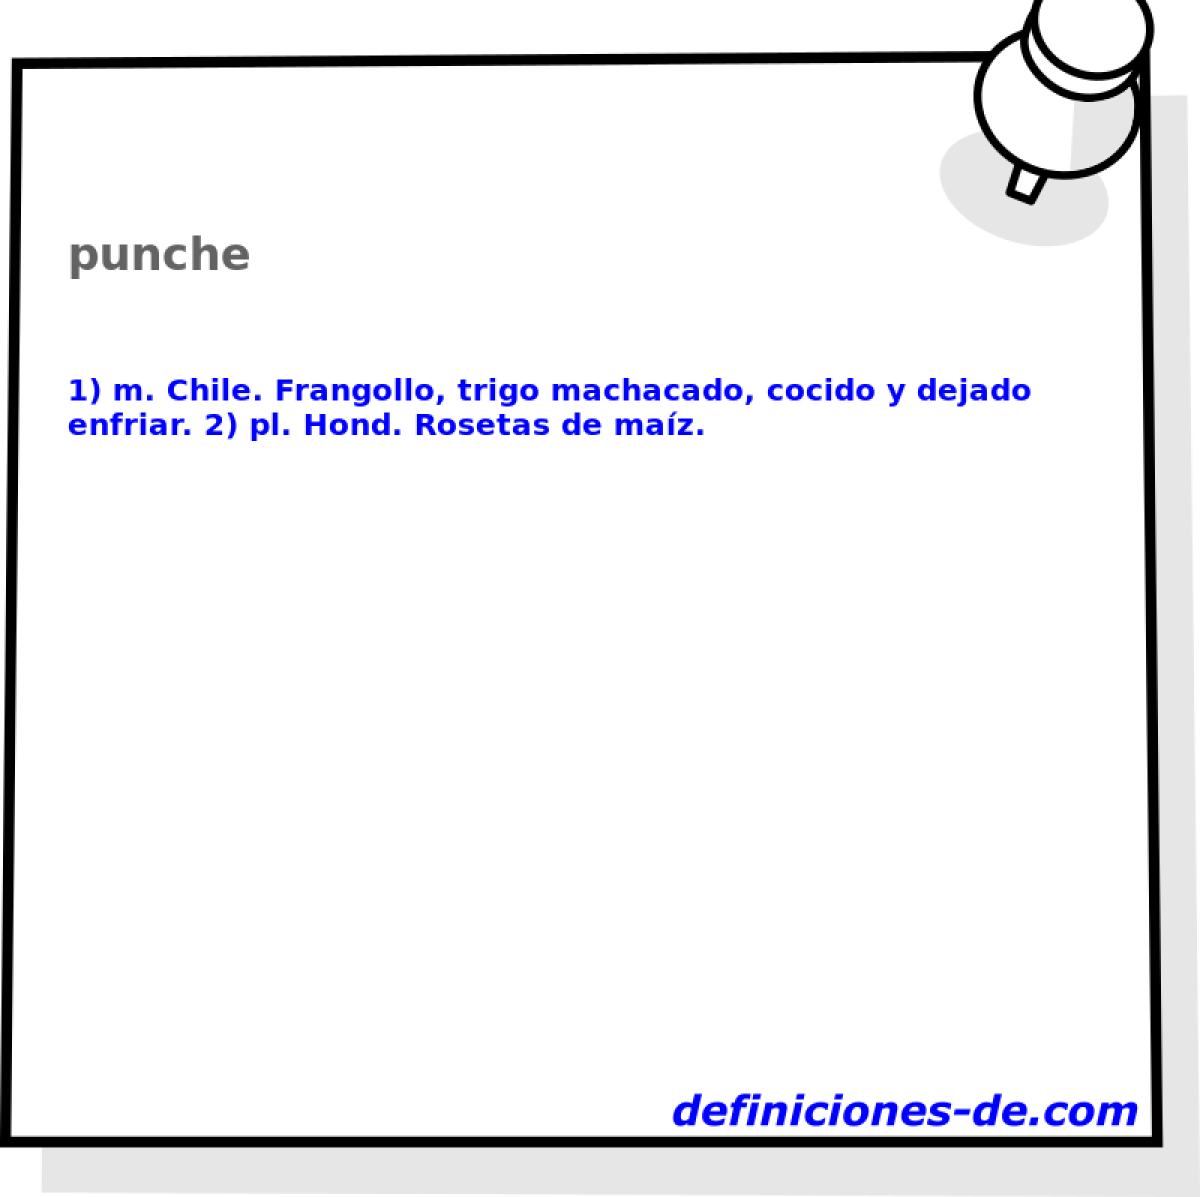 punche 